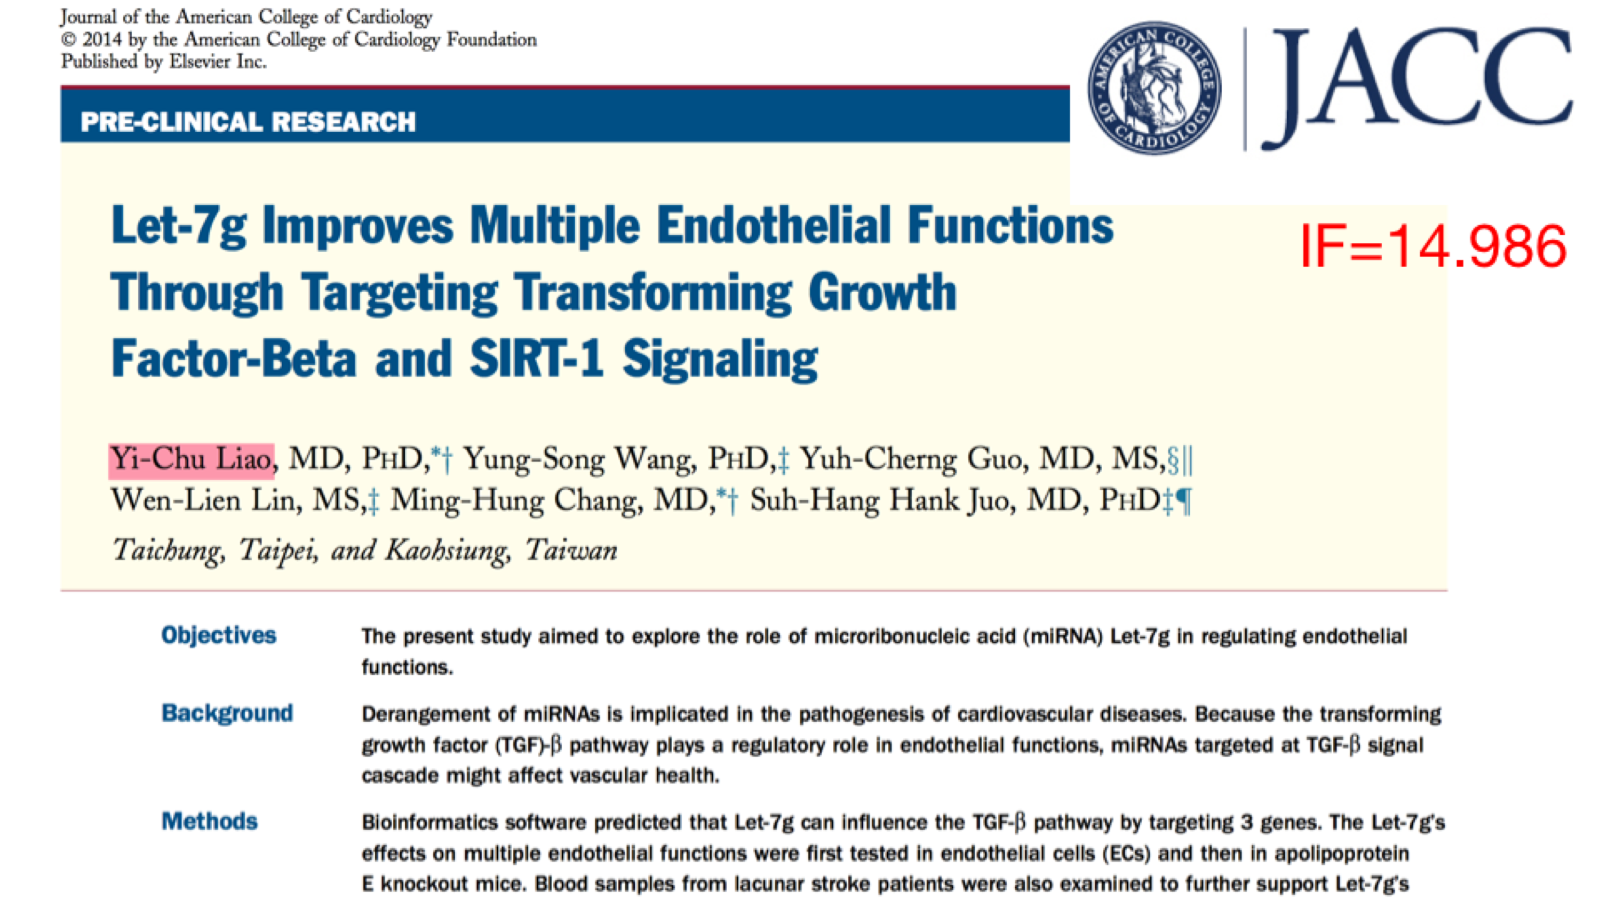 Let-7g Improves Multiple Endothelial Functions Through Targeting Transforming Growth Factor-Beta and SIRT-1 Signaling. IF=14.986